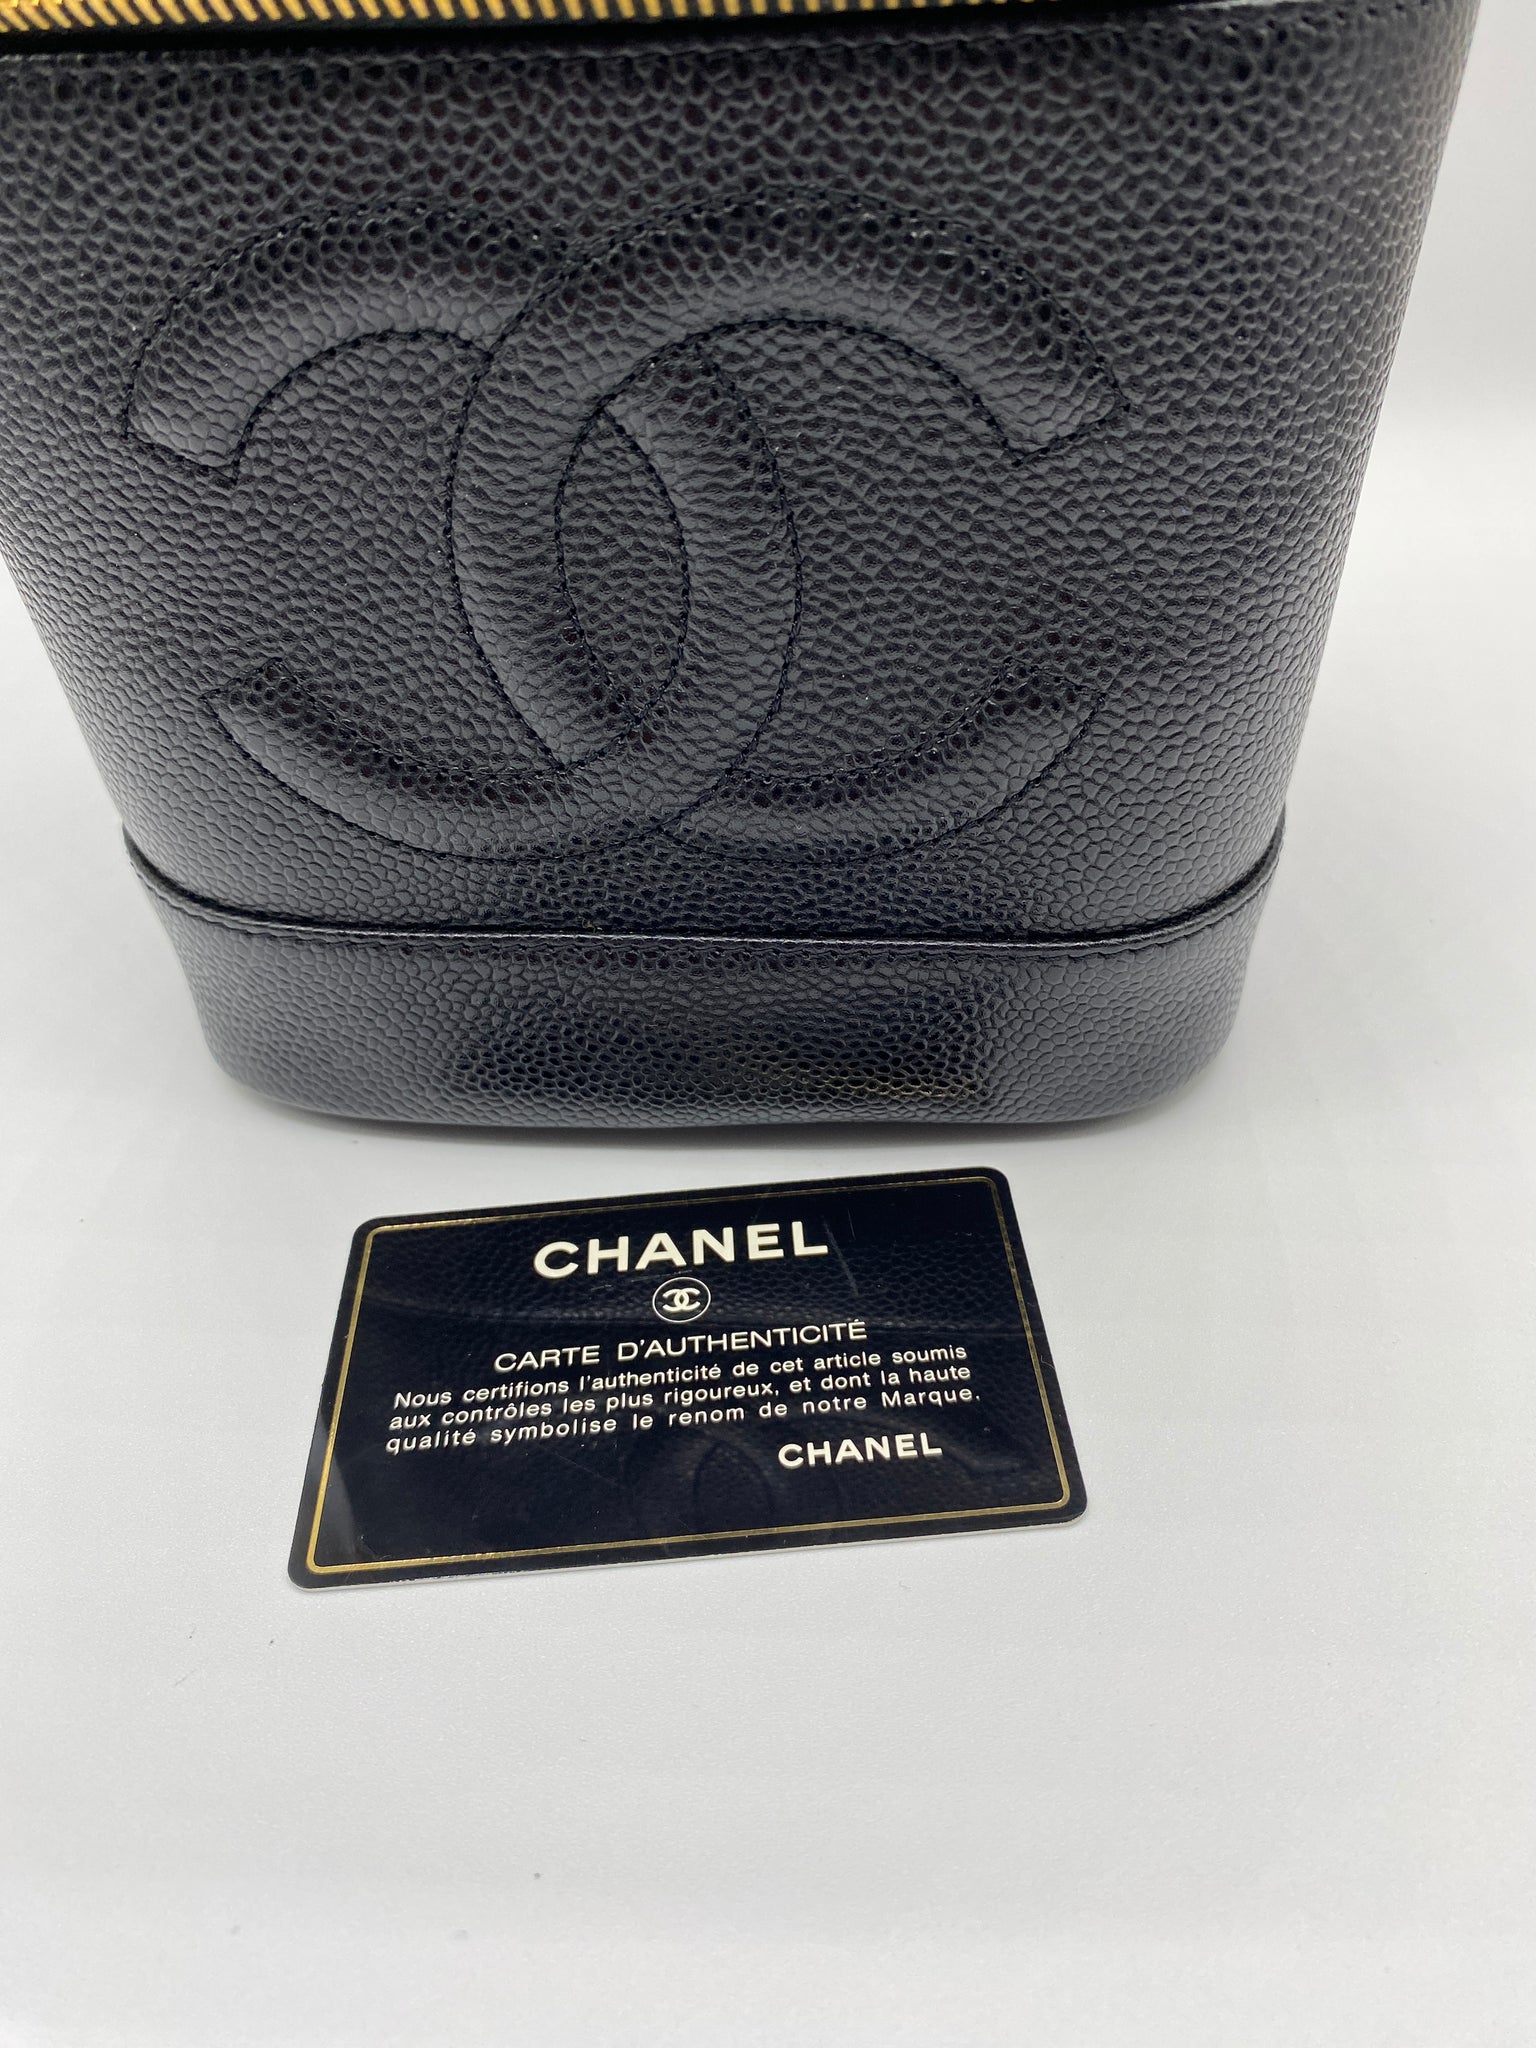 Chanel Caviar Leather Vanity Case Bag With Leather Strap #008